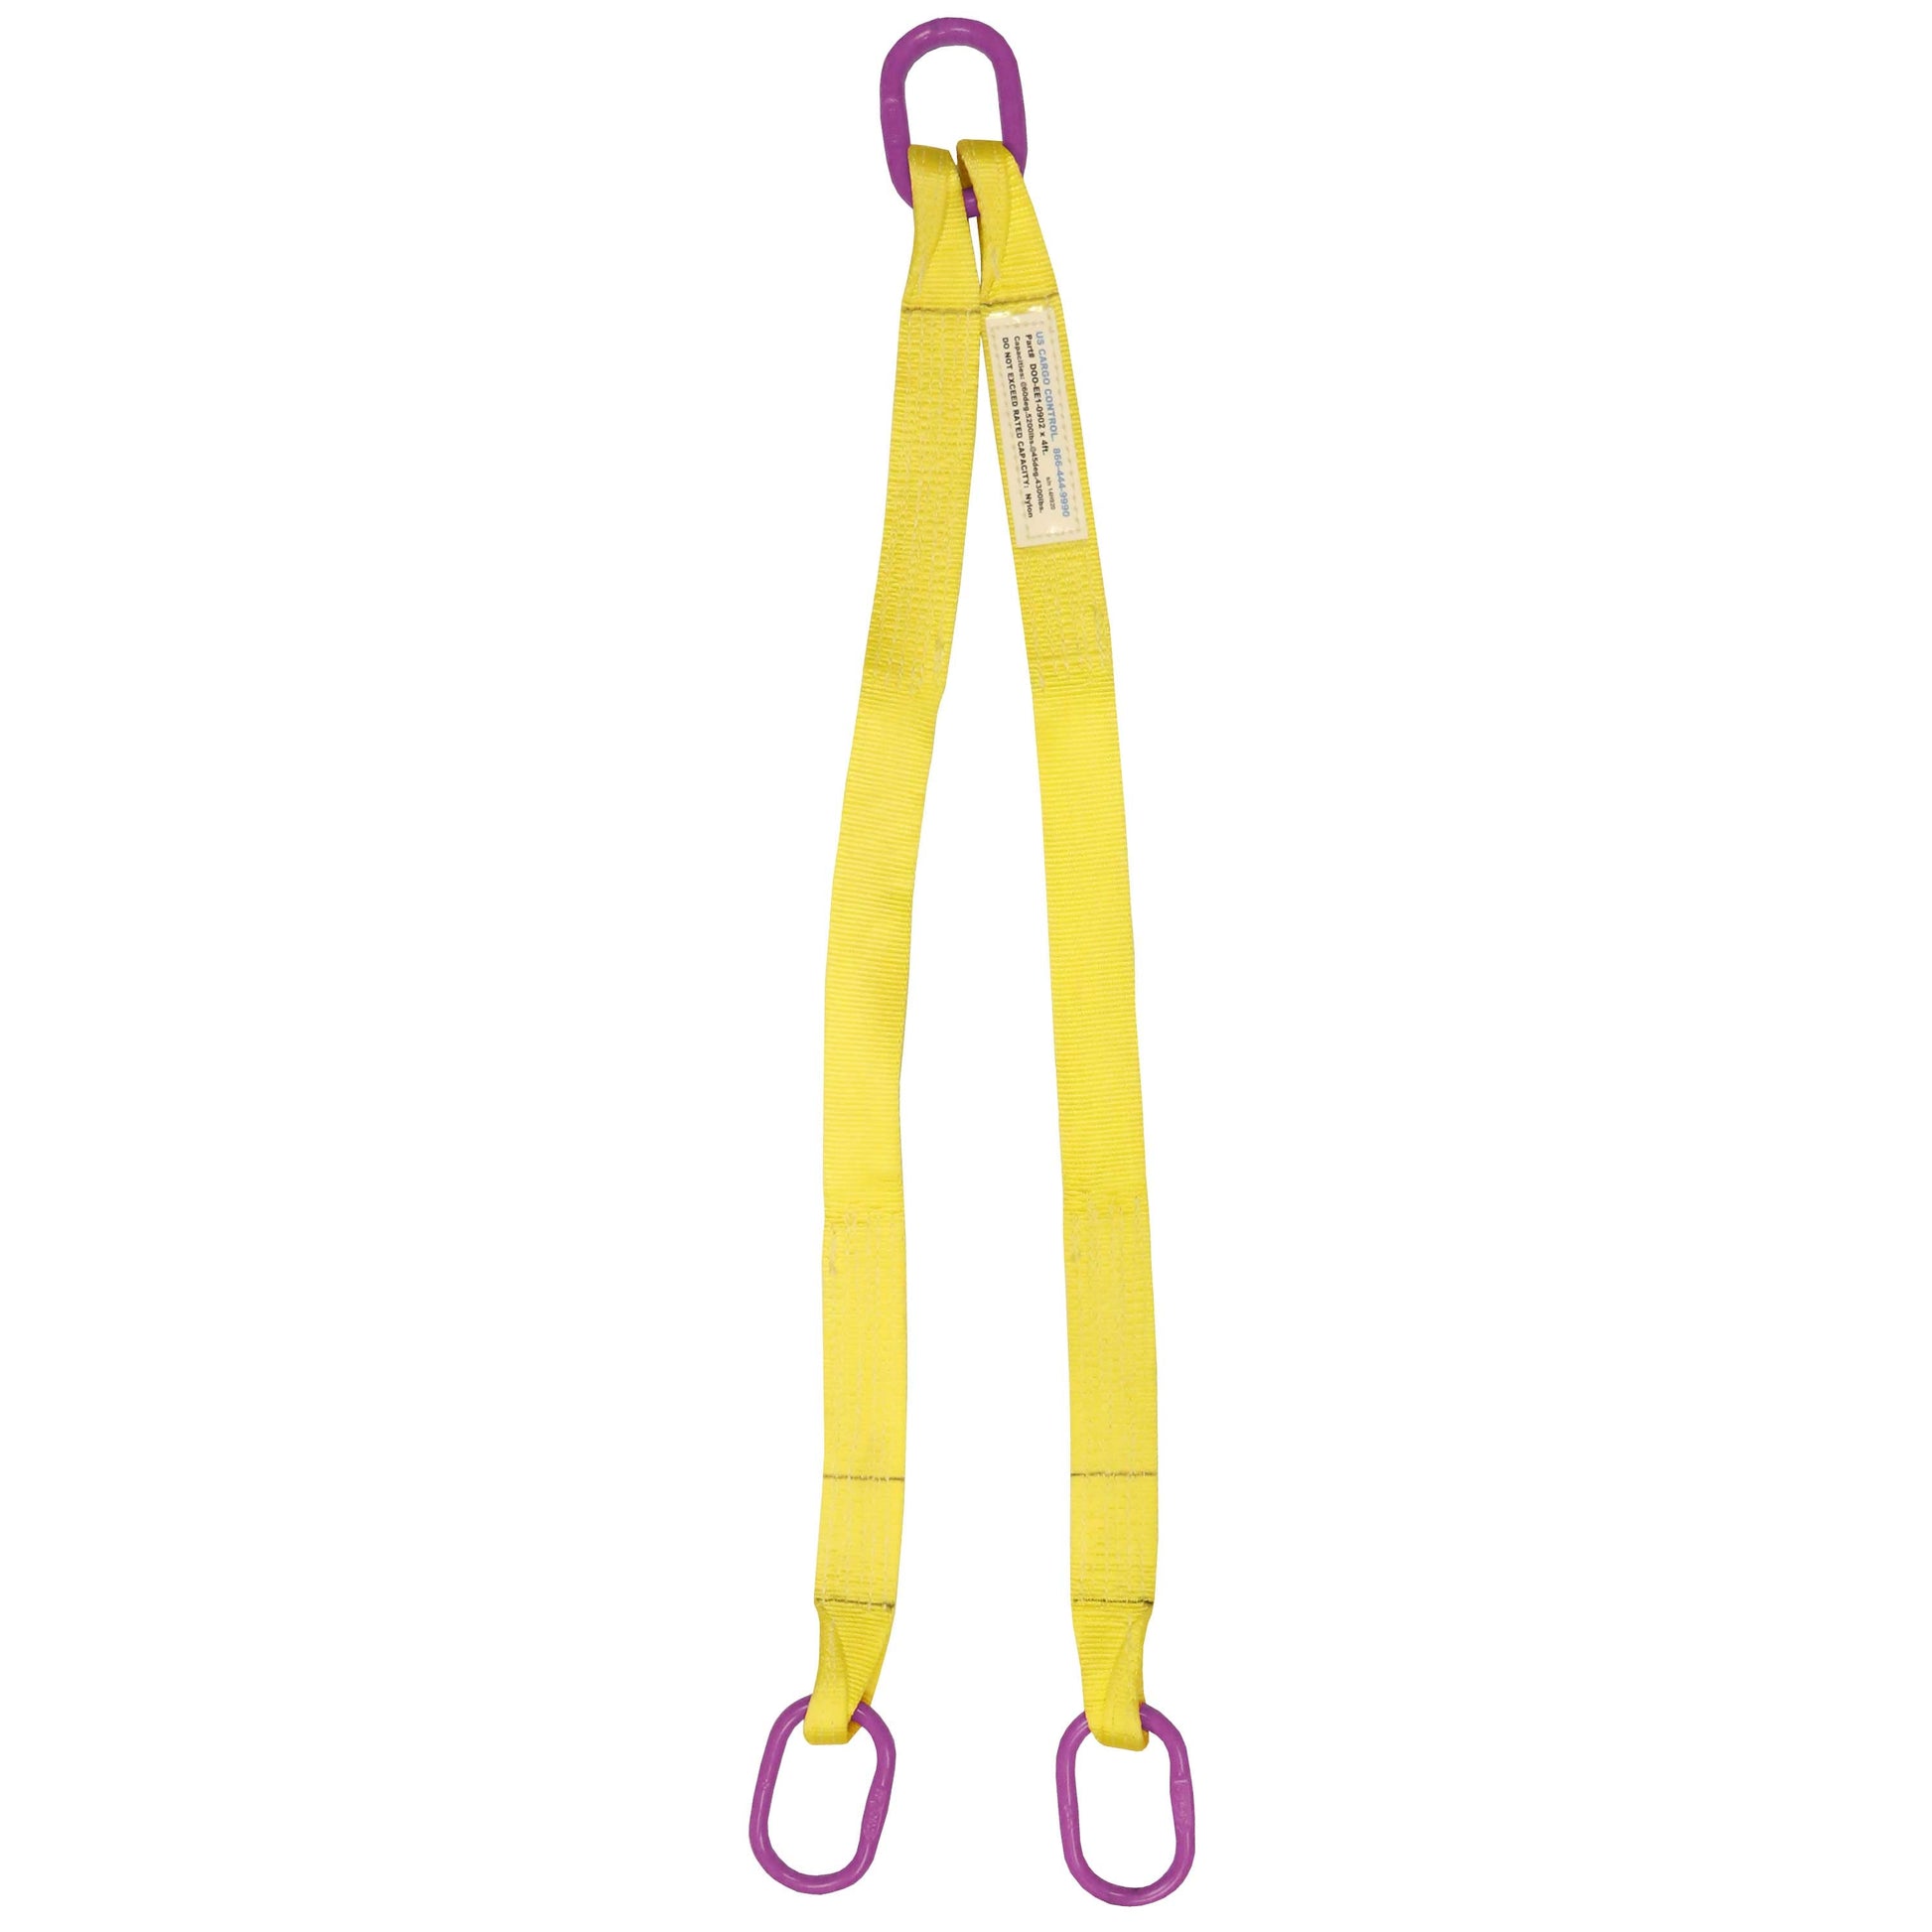 2 inchx7 foot (2 ply) Double Leg Nylon Sling w Master Link Both Ends image